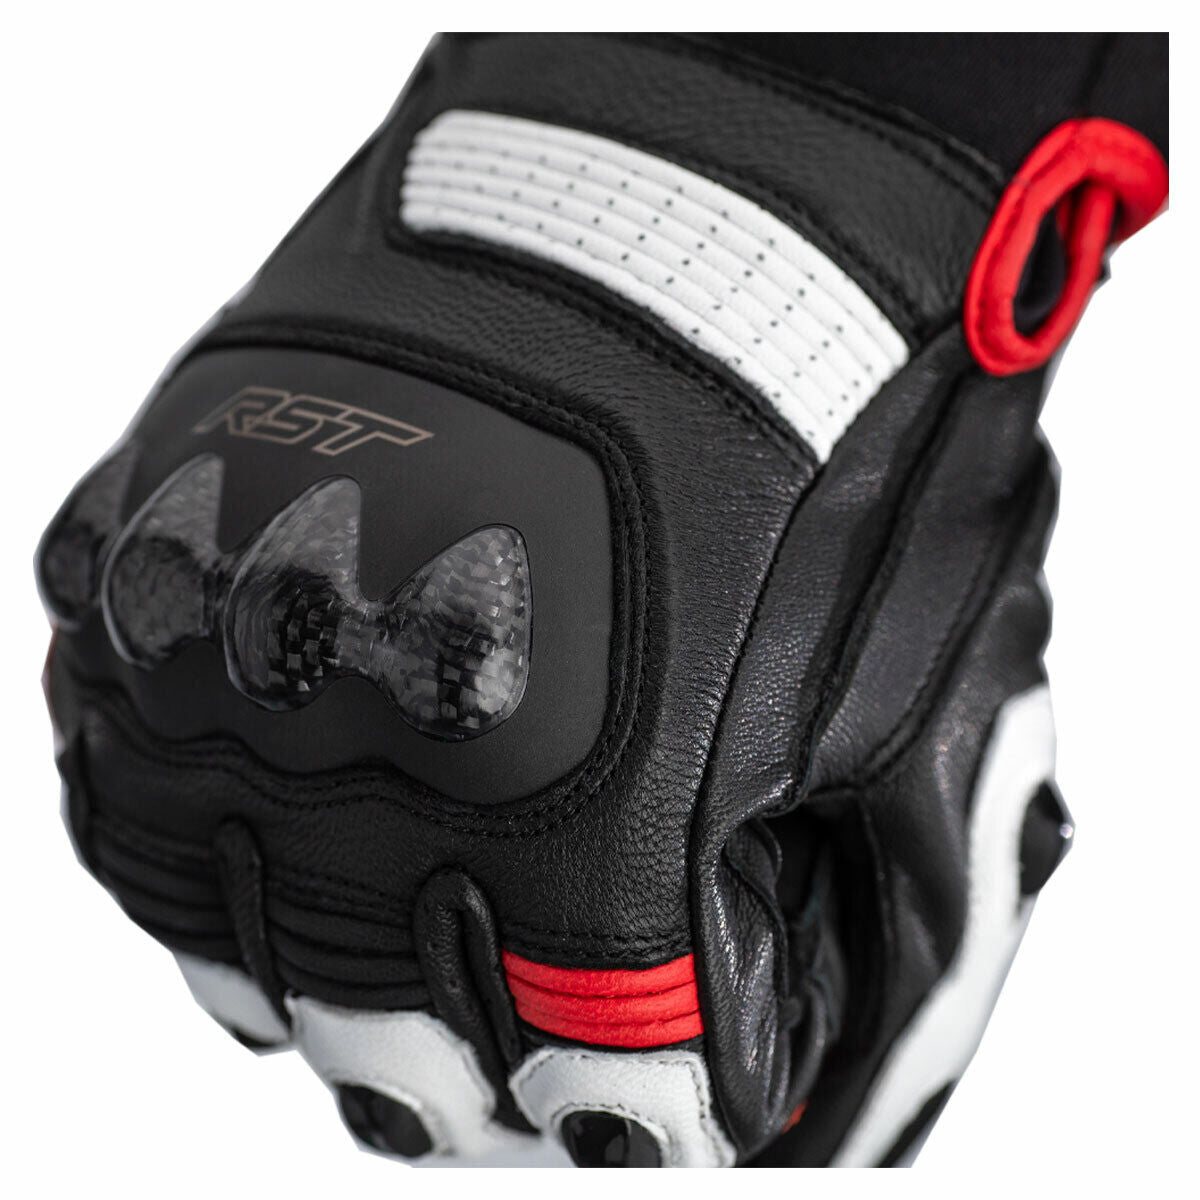 FREESTYLE 2 CE MENS GLOVES - RED